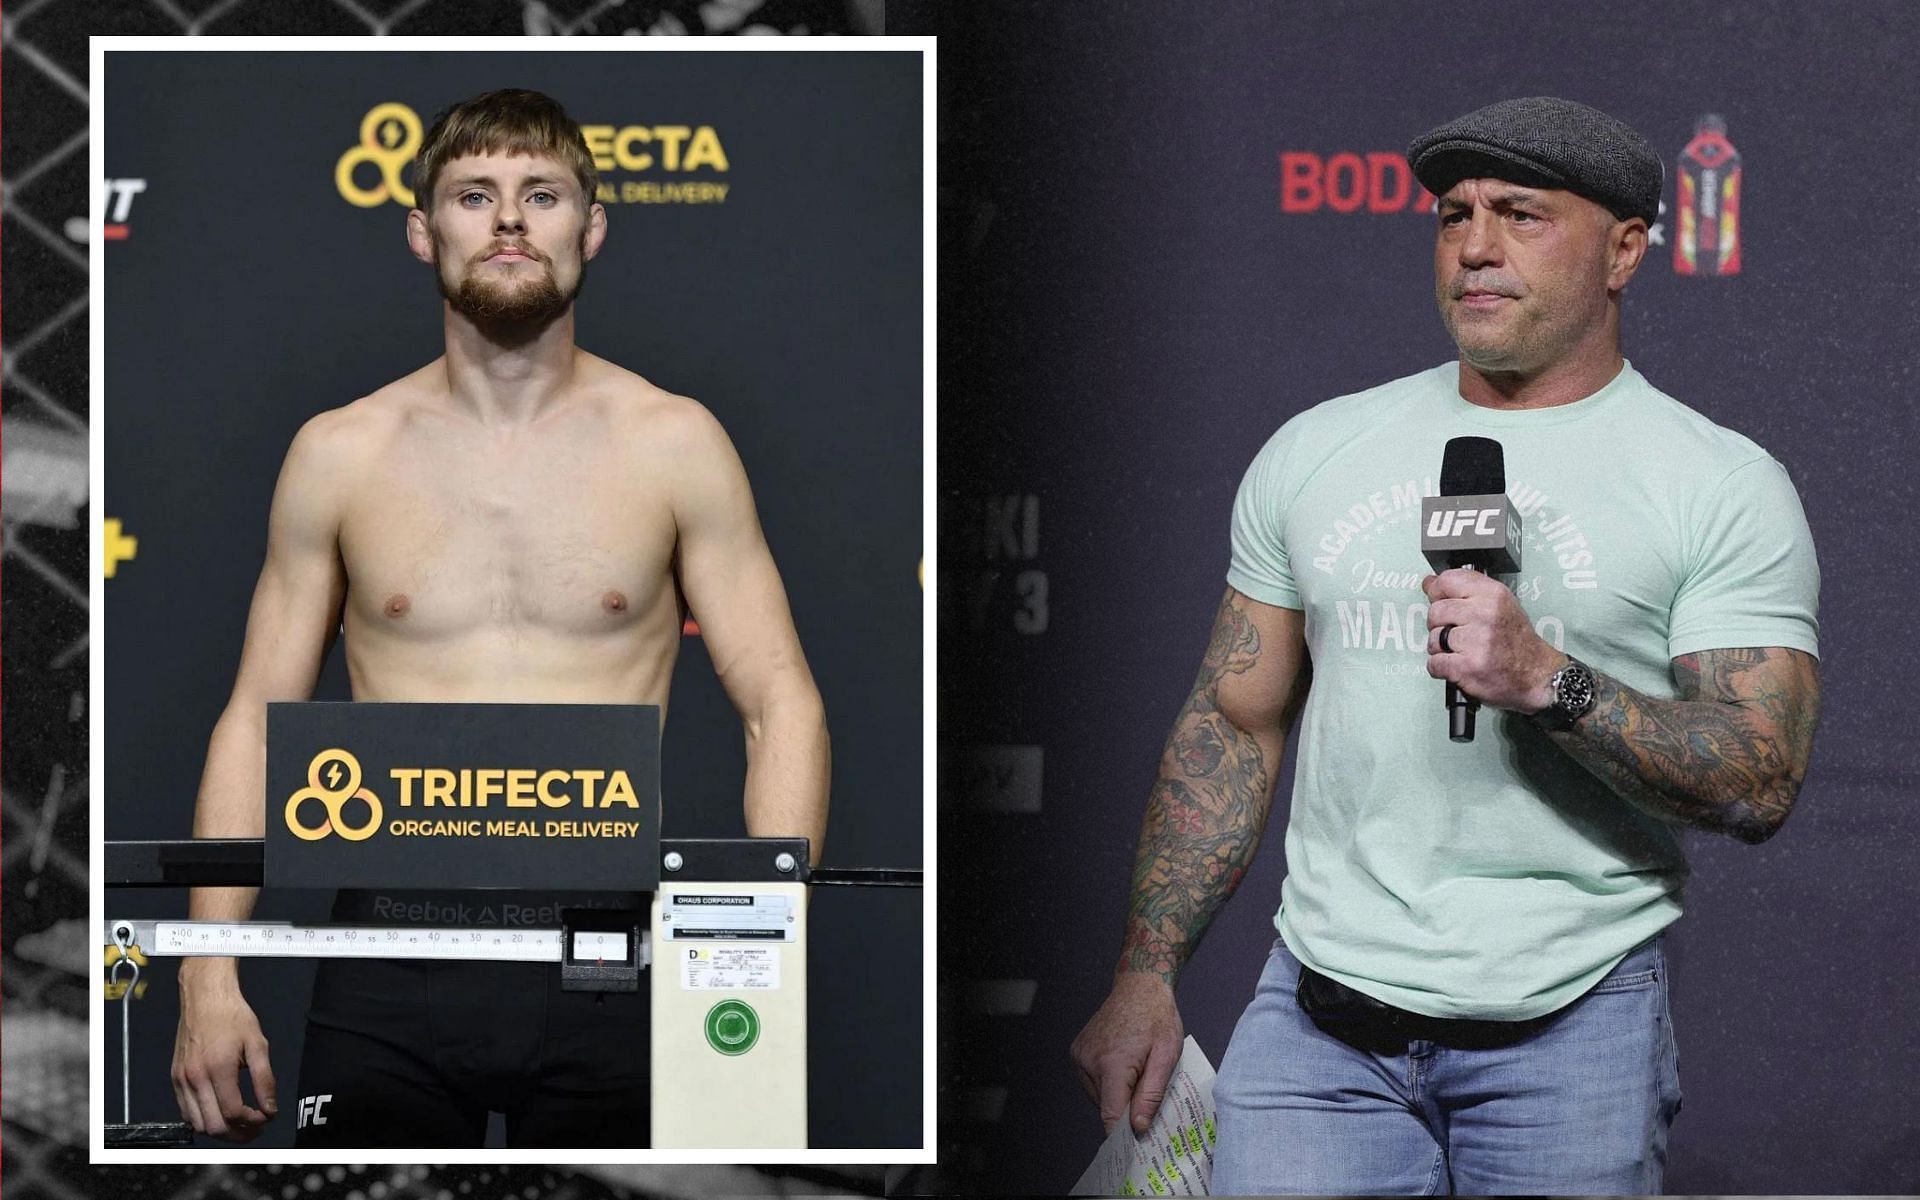 Bryce Mitchell goes on a verbal rant against Joe ROgan. [Image courtesy: Getty Images]